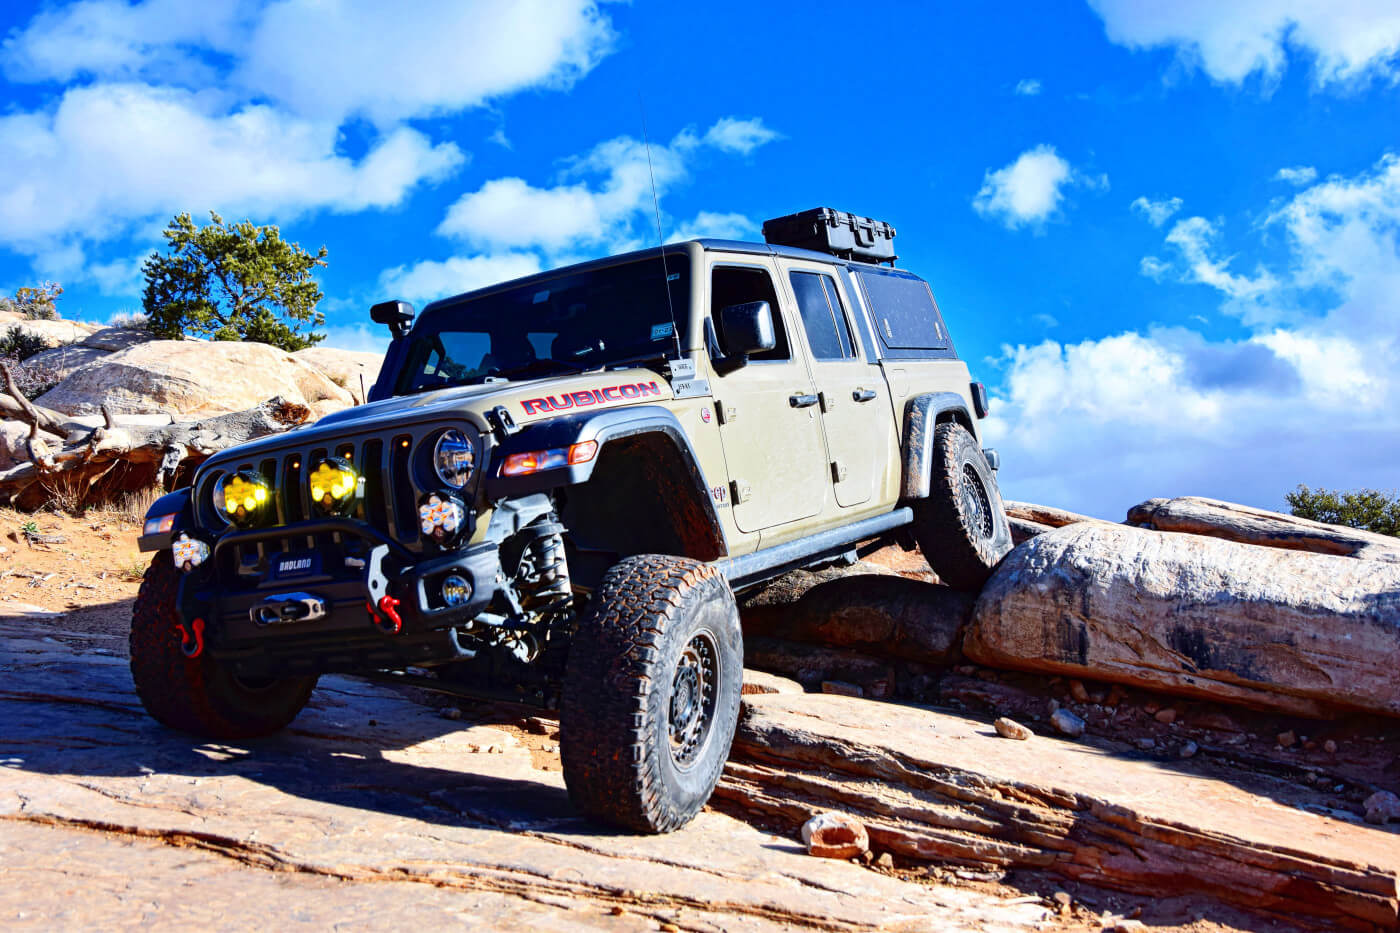 Kenny's Jeep Gladiator on an off-road ride